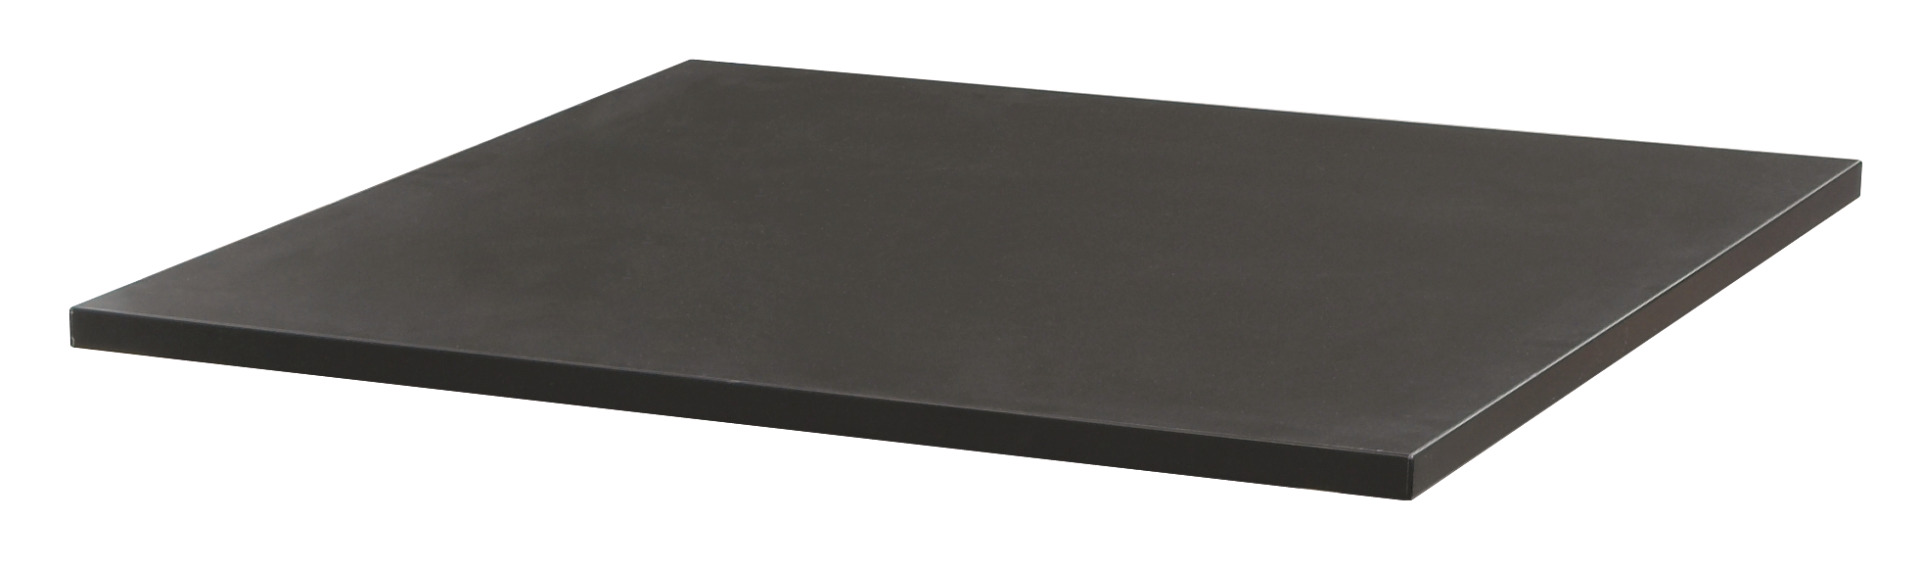 Worktop for OFFCIE 600 x 600 mm, Black